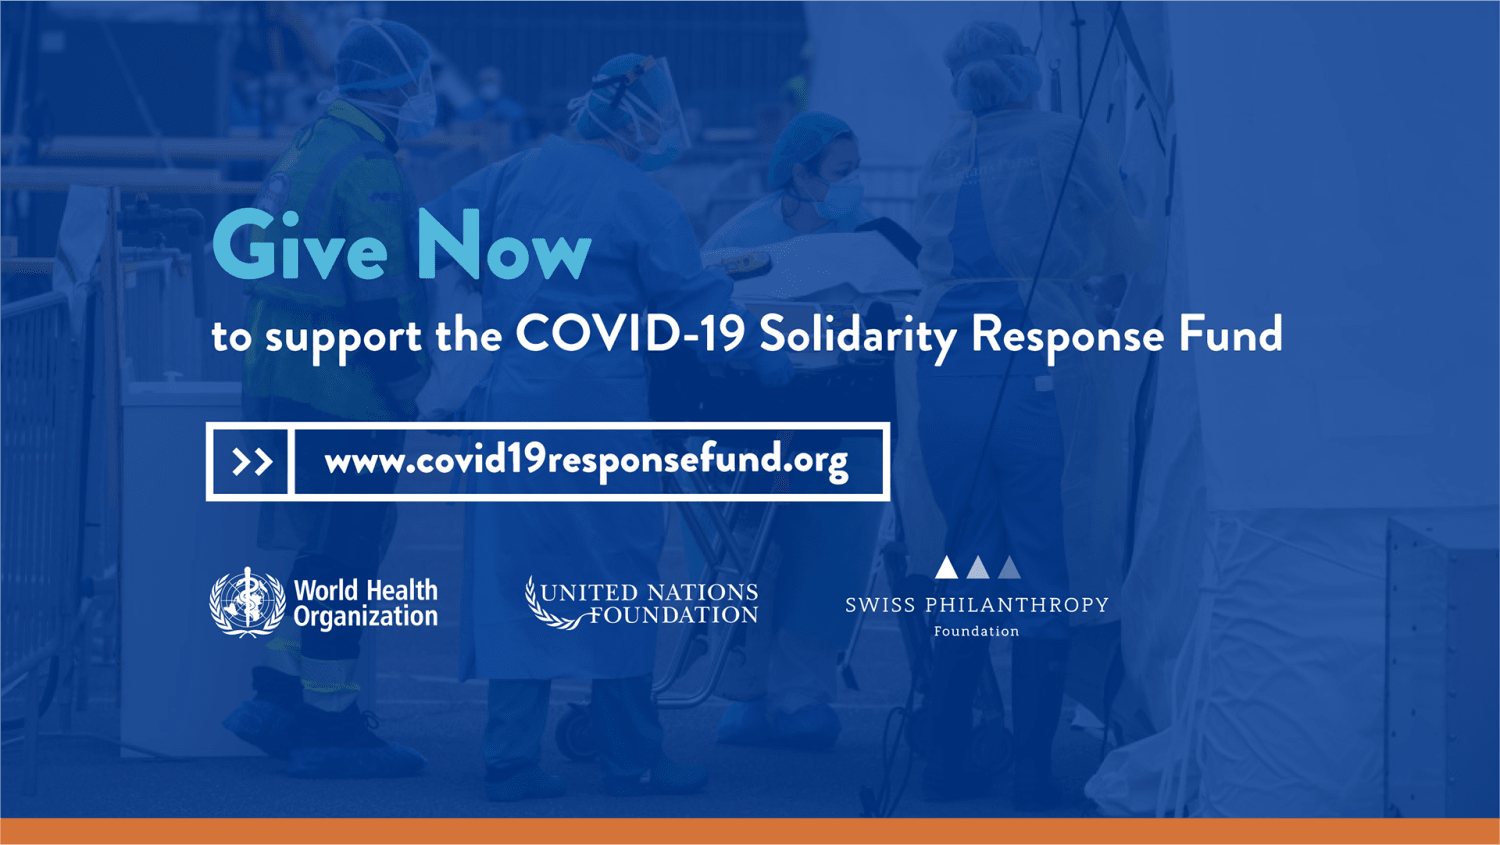 Supporters of the COVID-19 Solidarity Response Fund for WHO